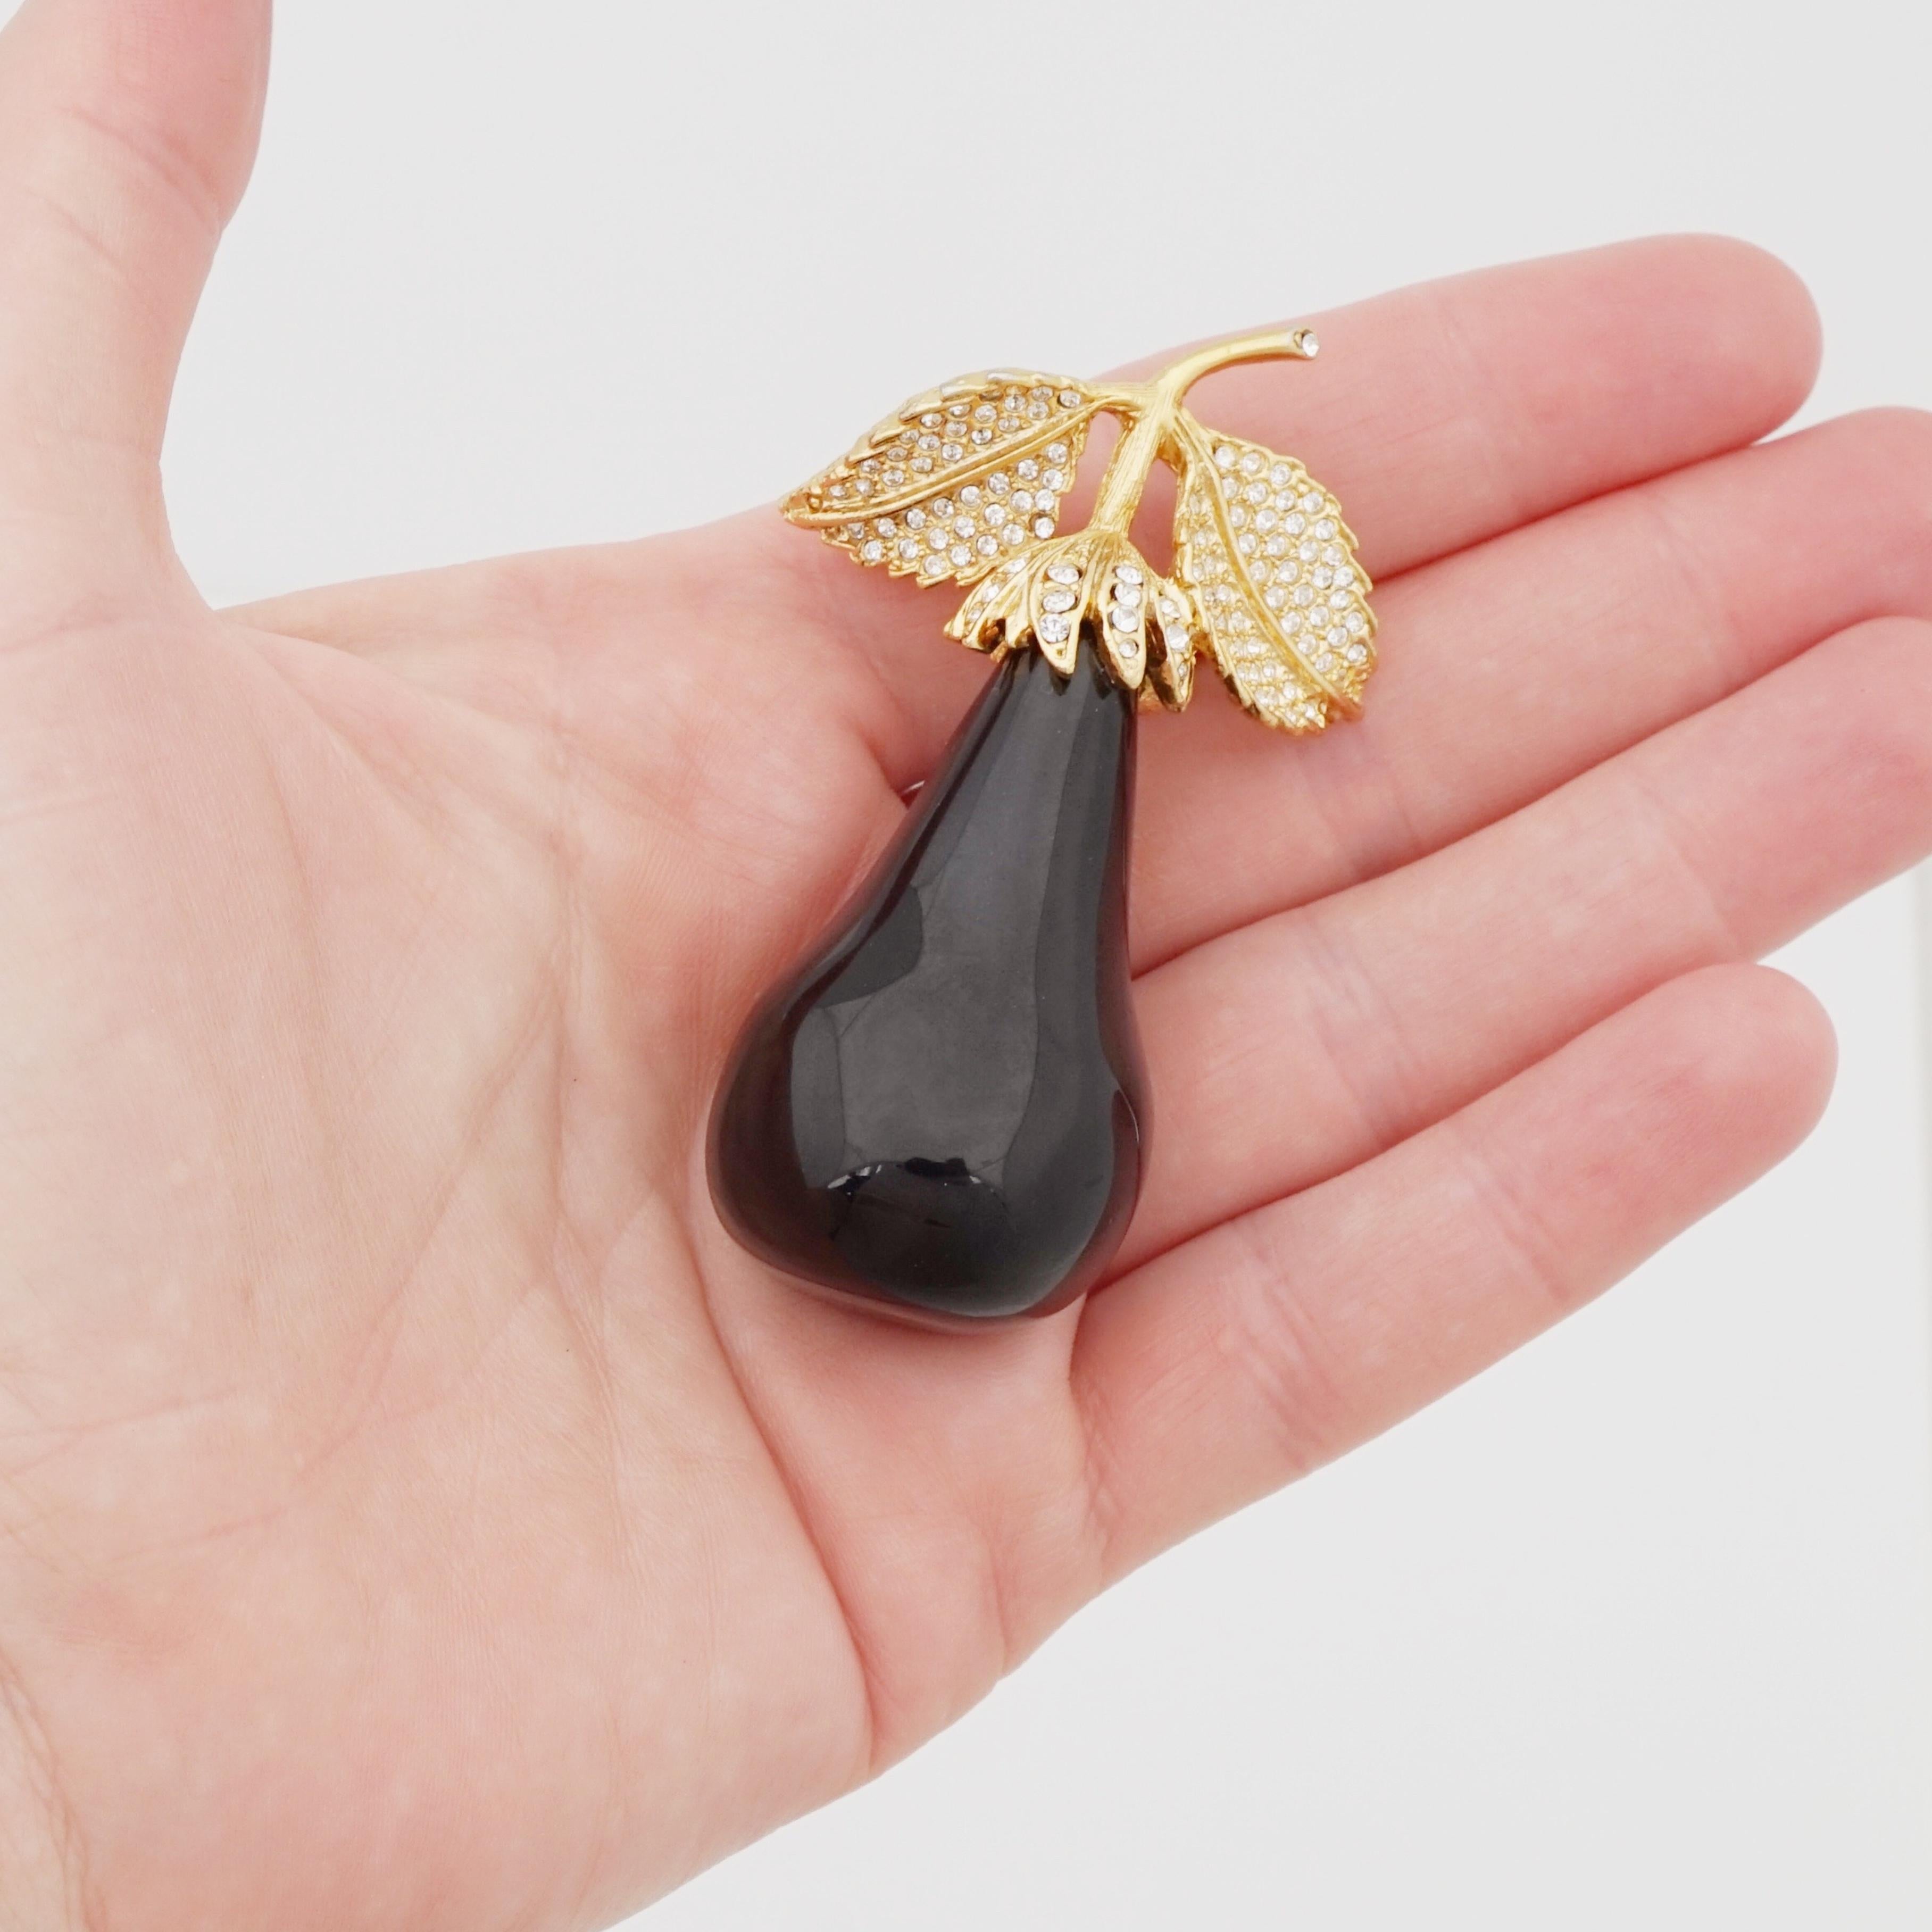 Black Lucite Pear Brooch With Rhinestone Details By Kenneth Jay Lane, 1990s In Good Condition For Sale In McKinney, TX